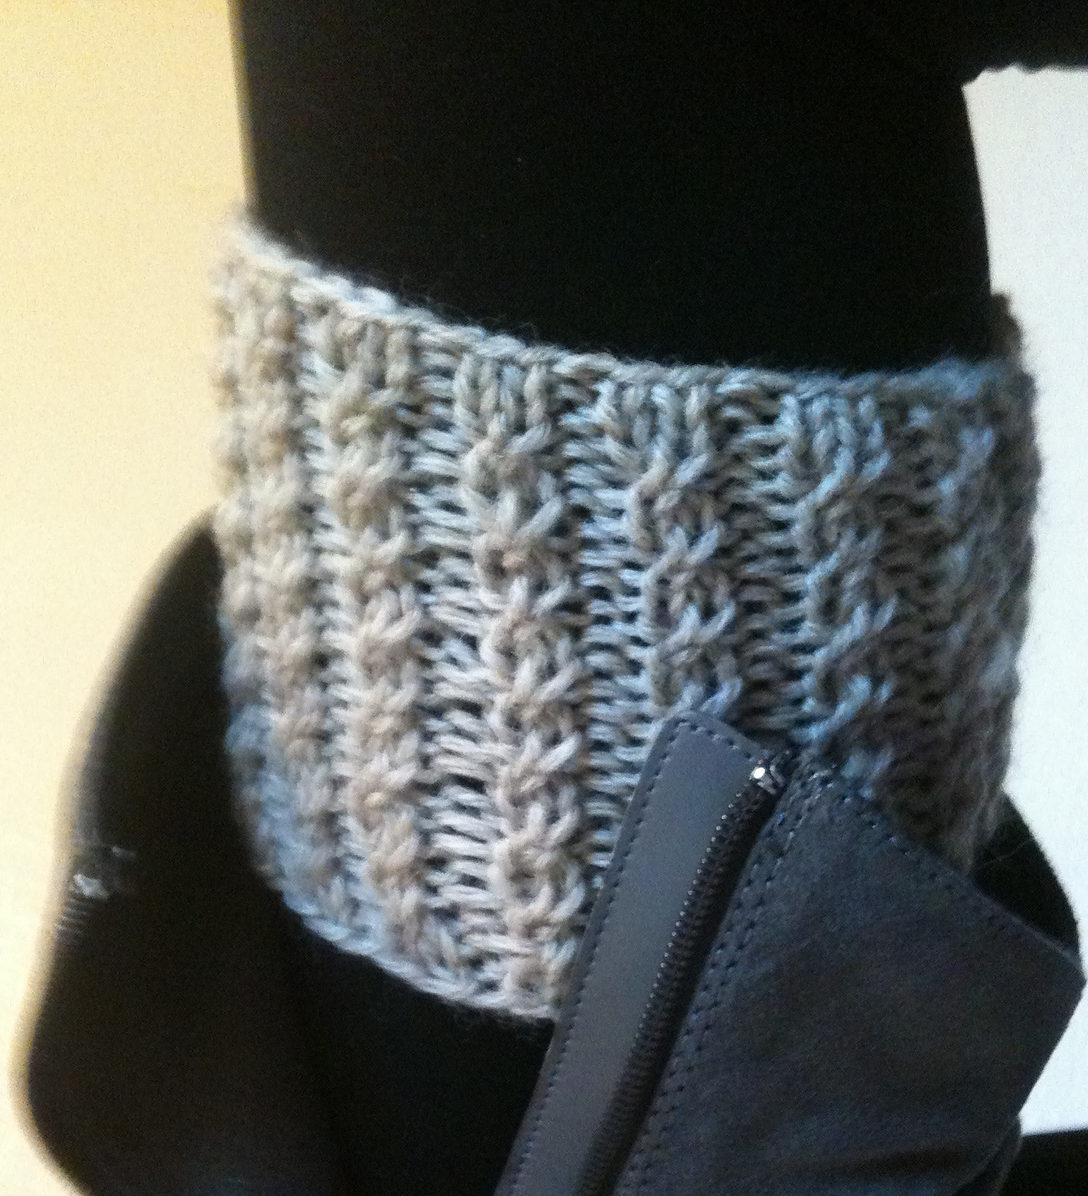 Knit Boot Cuffs Pattern Free Boot Cuff Knitting Patterns In The Loop Knitting